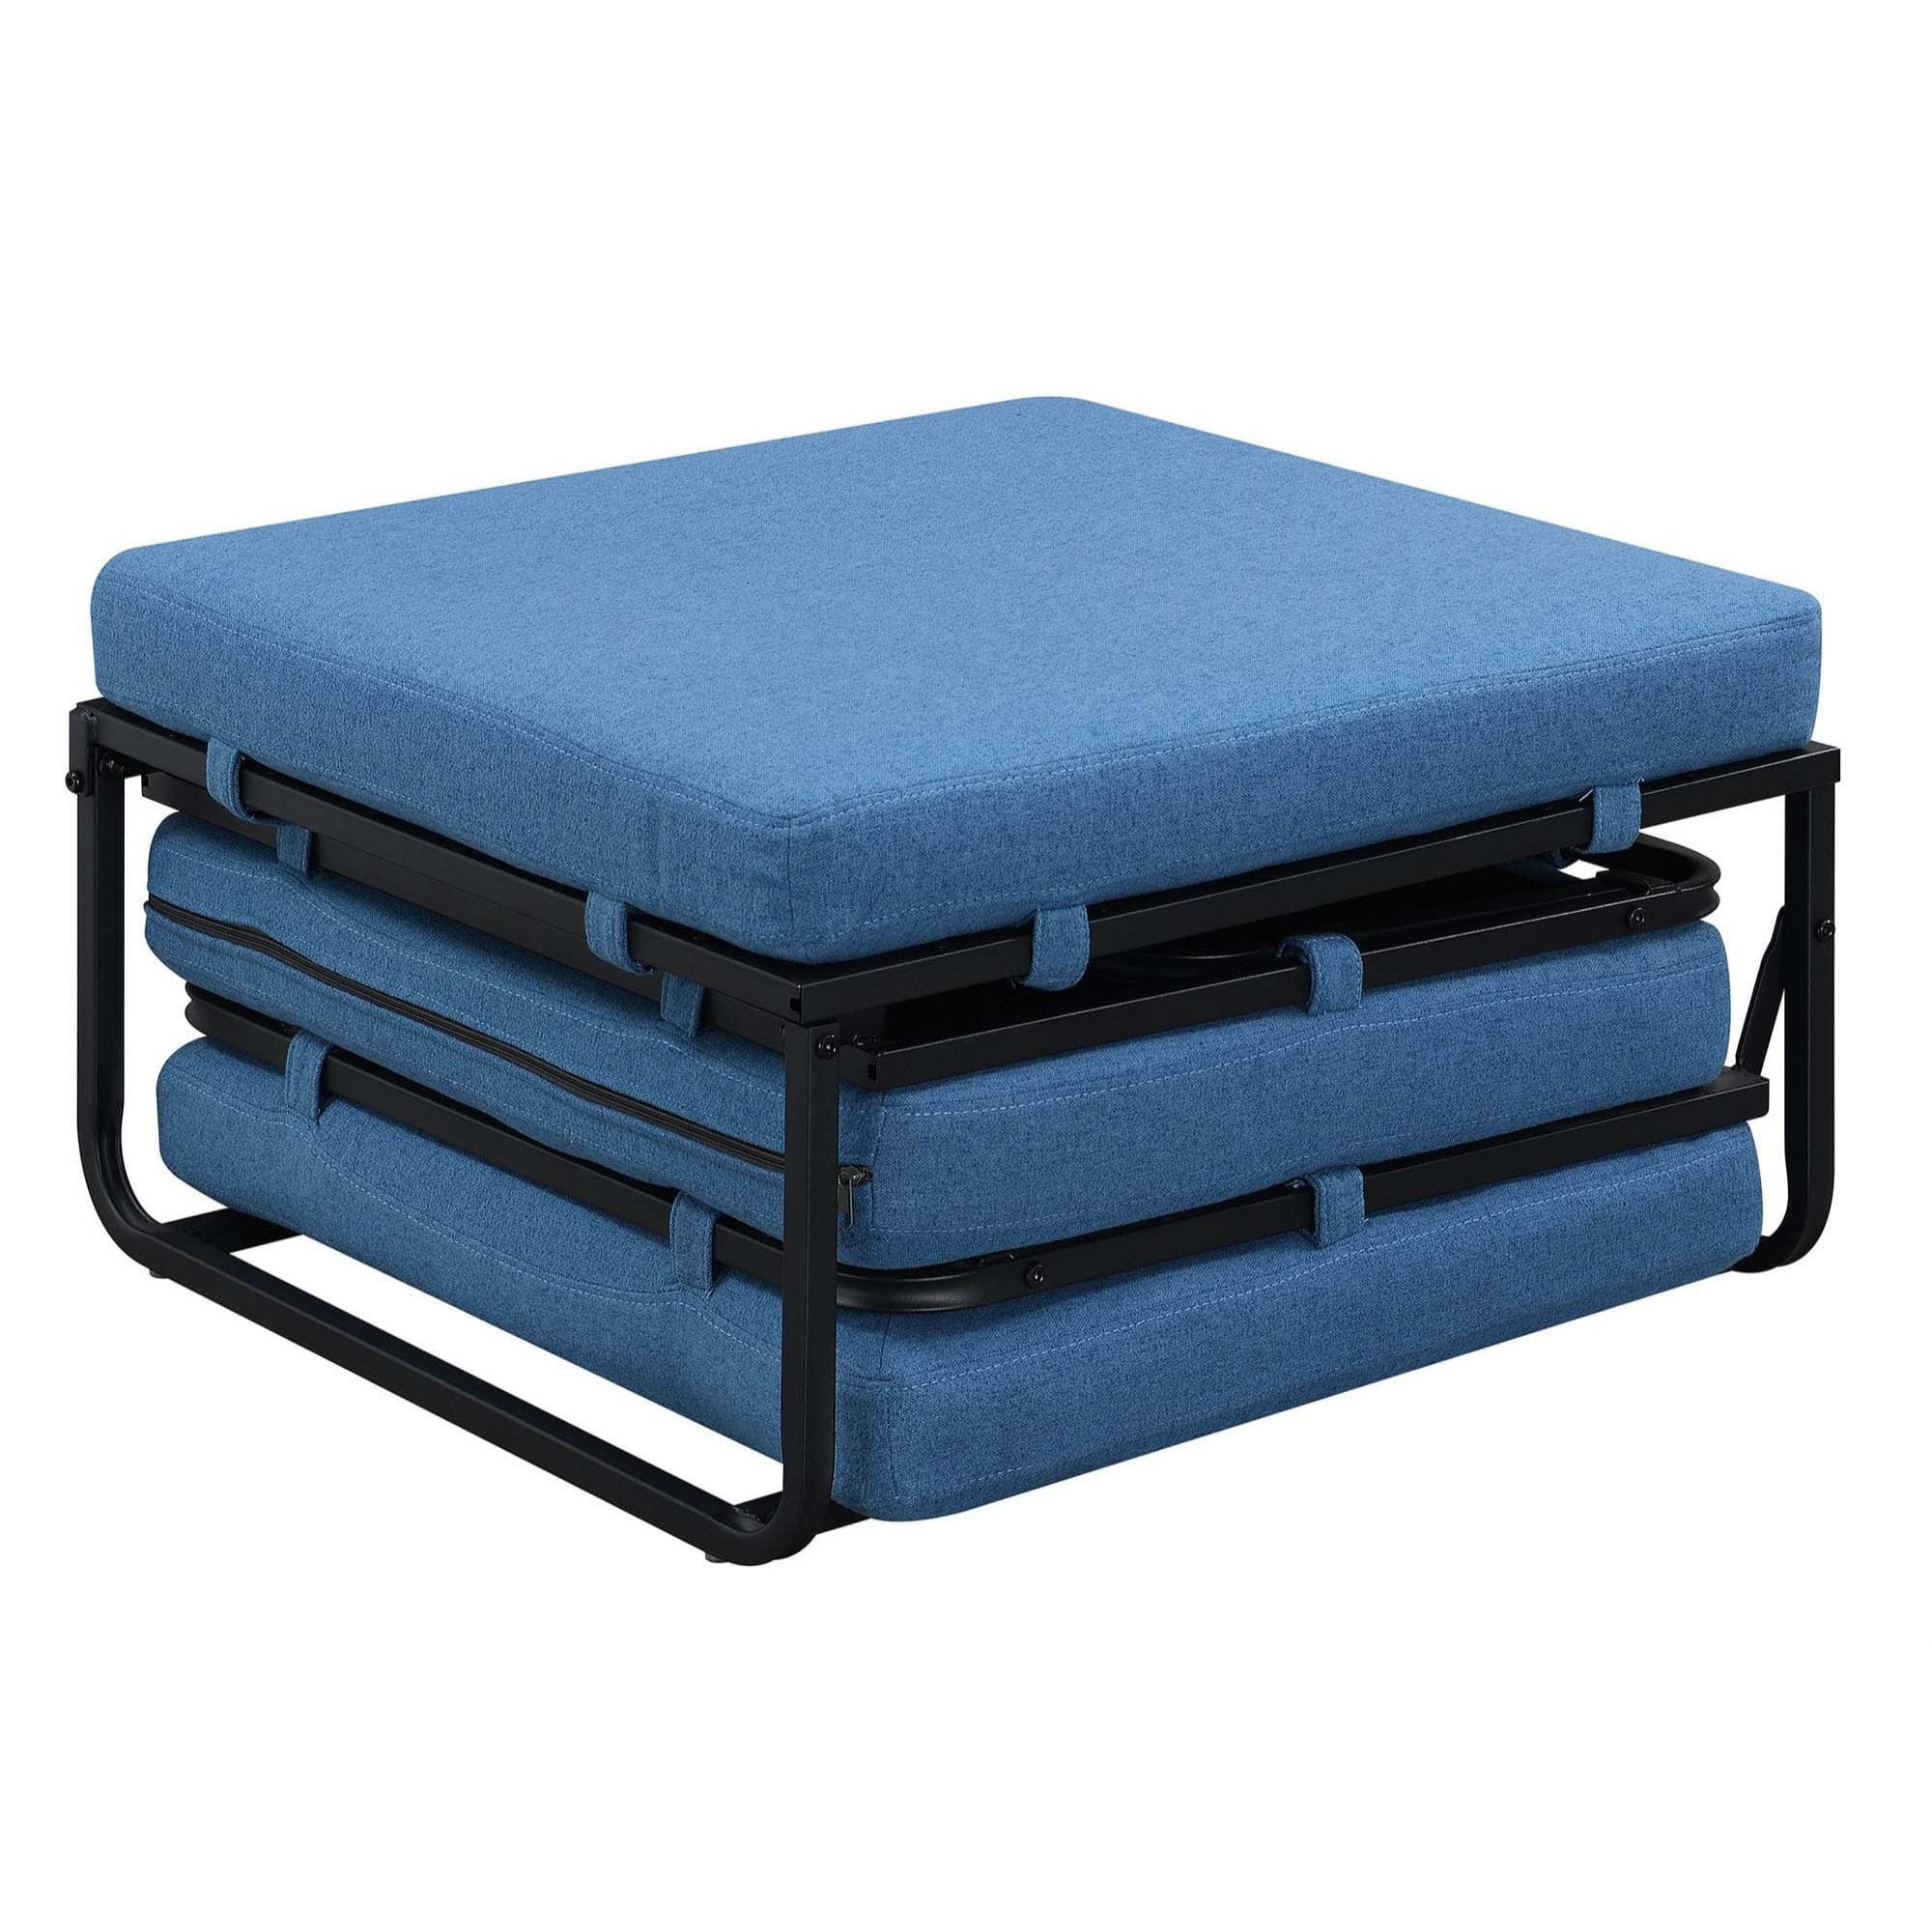 Soft Blue Fabric Convertible Ottoman Twin Bed with Metal Frame